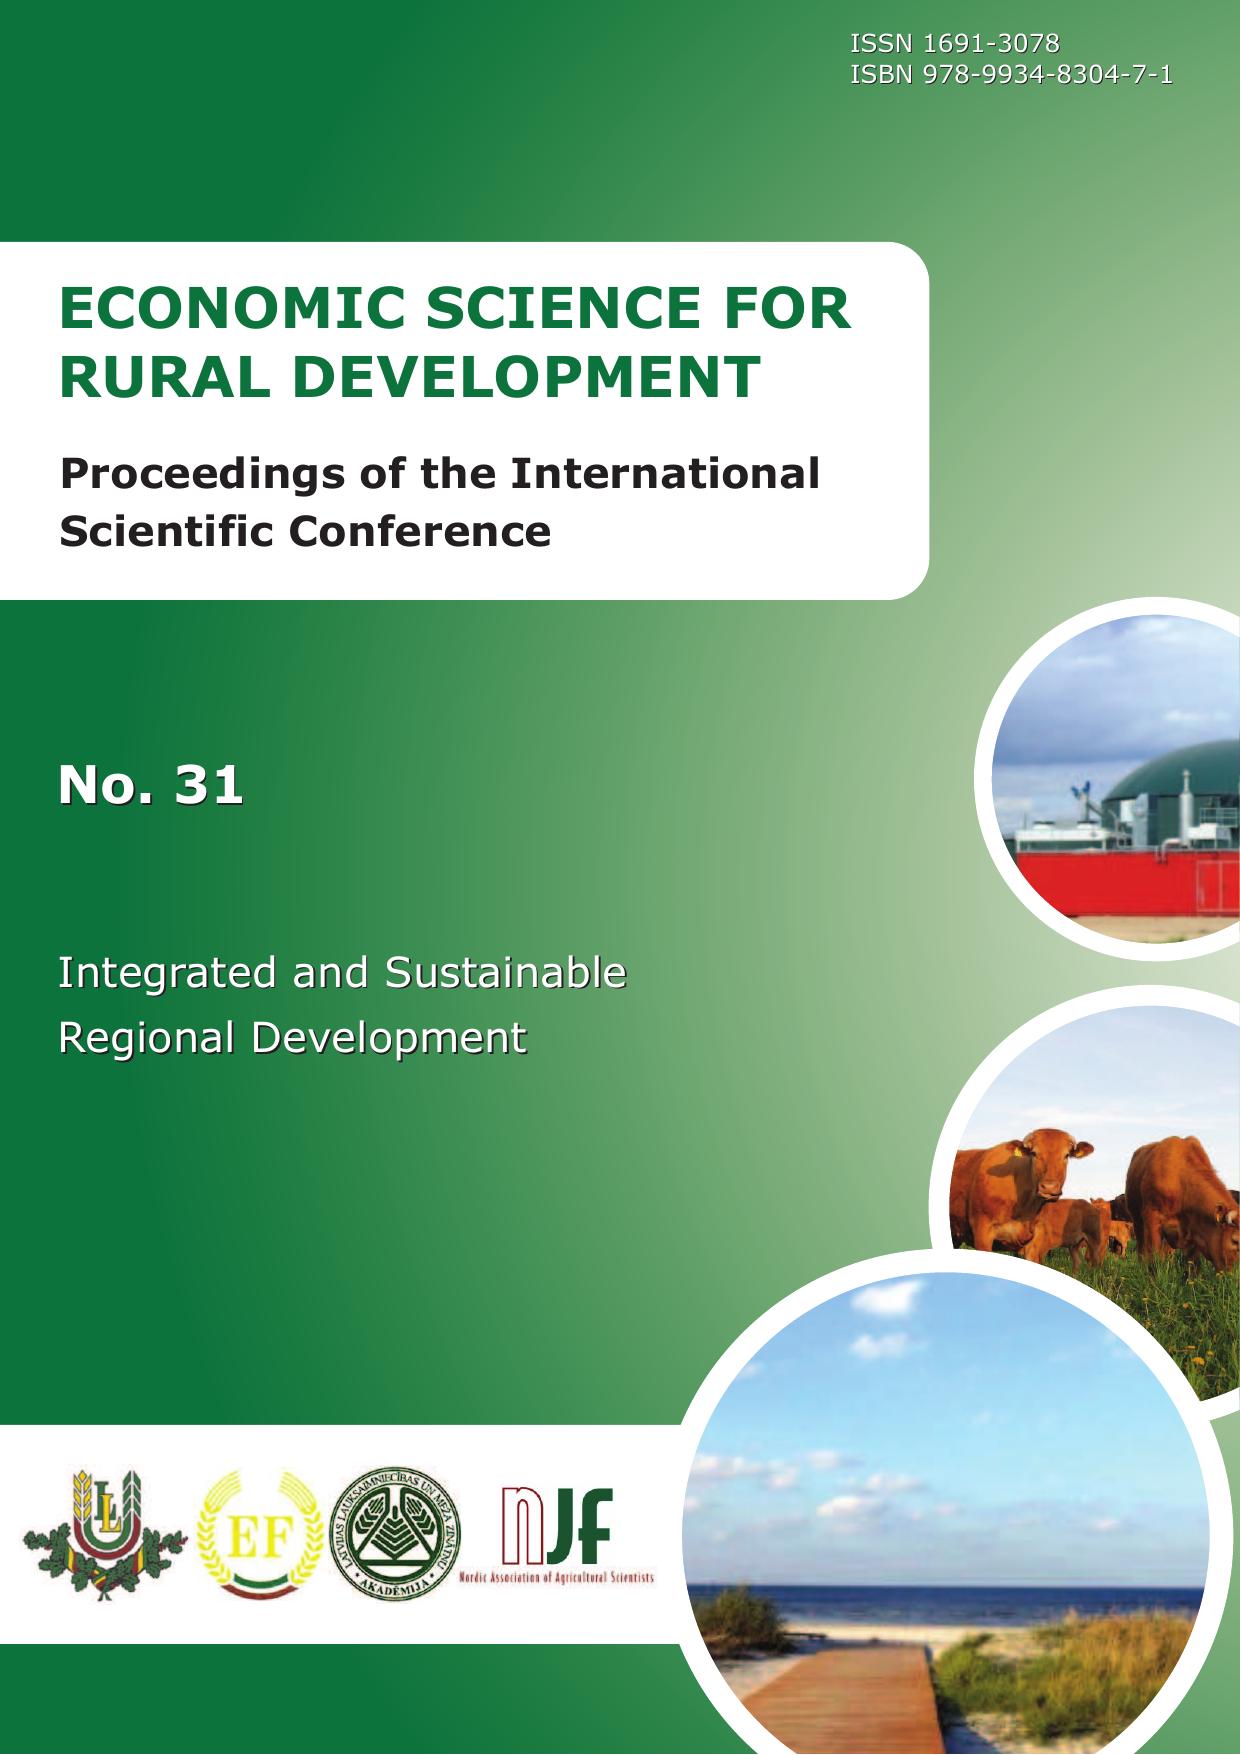 International Scientific Conference "Economic Science for Rural Development". Integrated and sustainable regional development